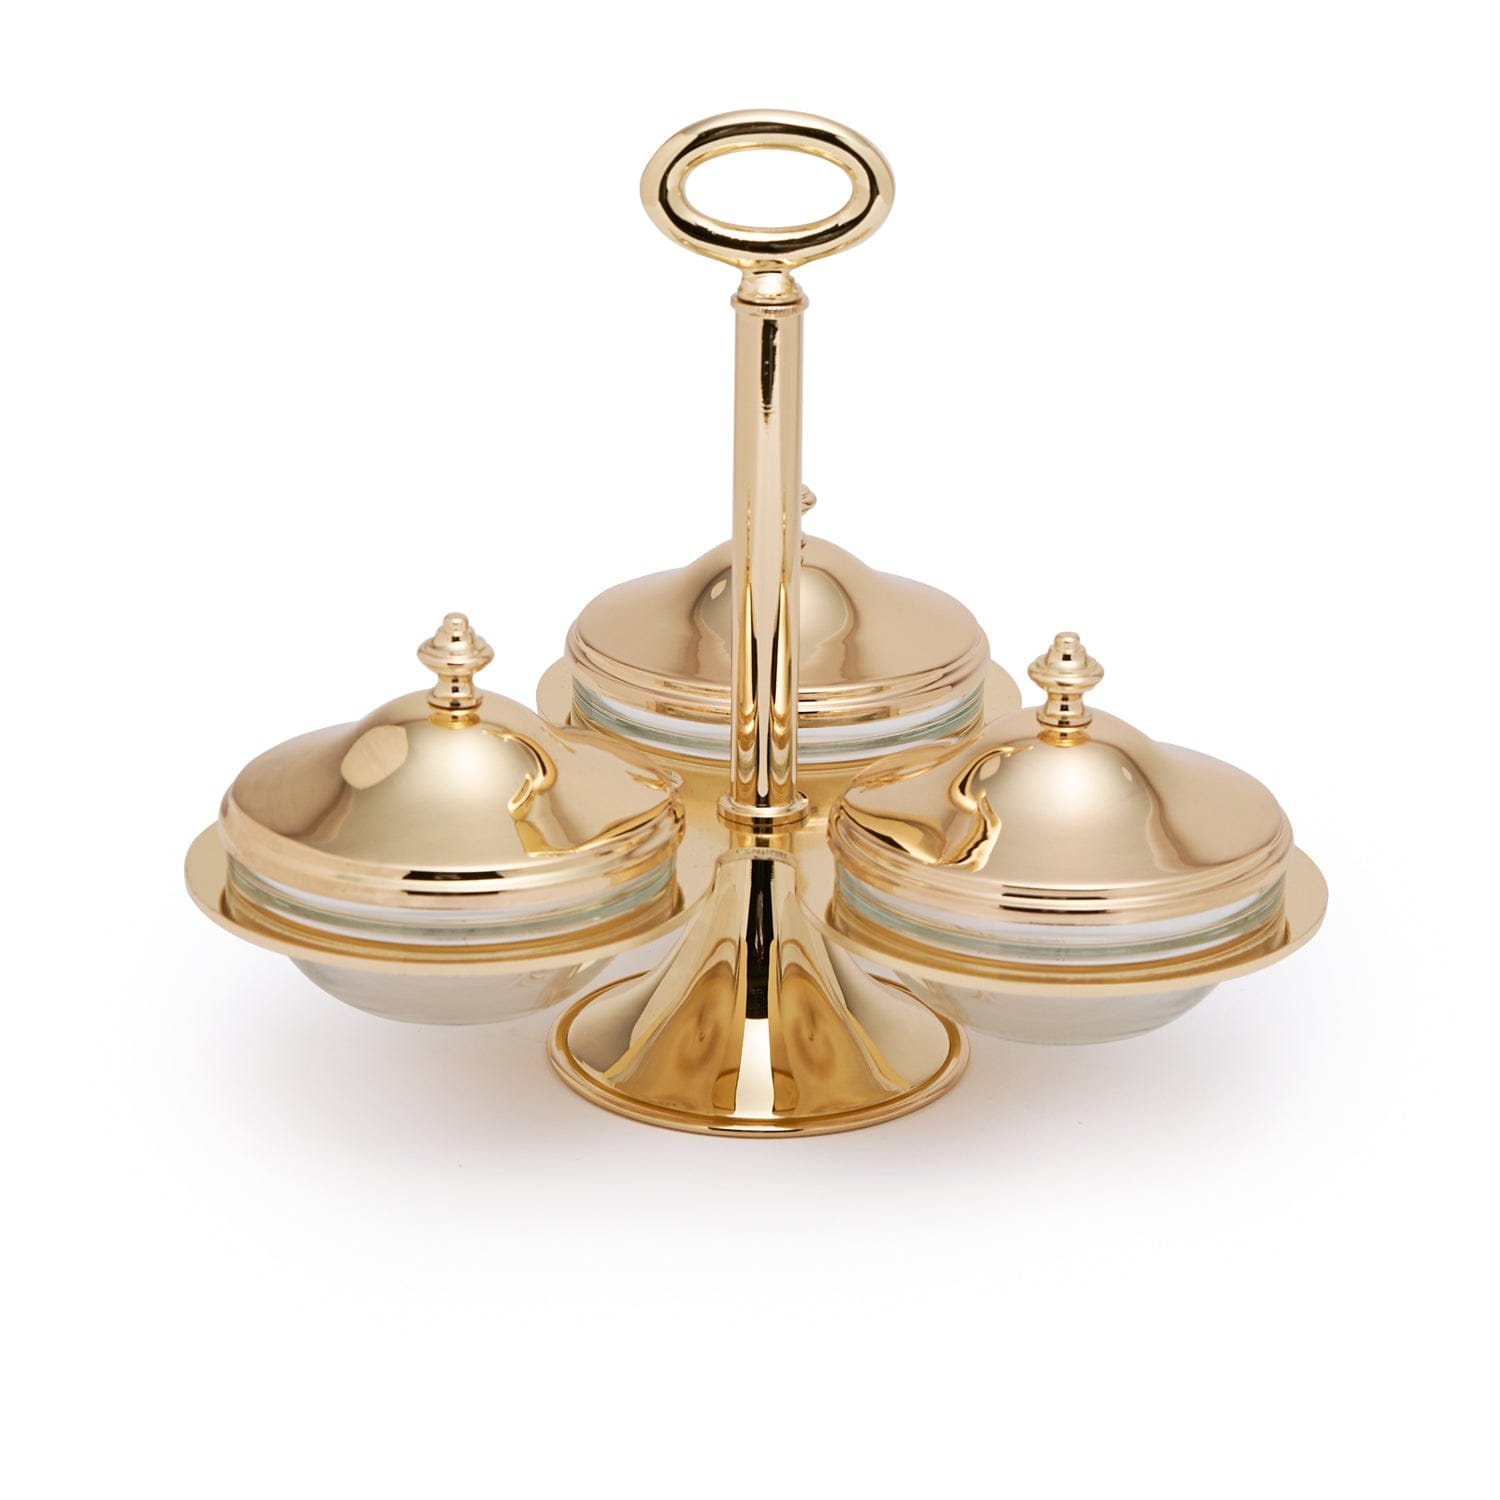 Pantazelos Rotating Stand Gp With 3 Glass Bowls 10.5Cm With Covers-STAND-668-3-105-GP